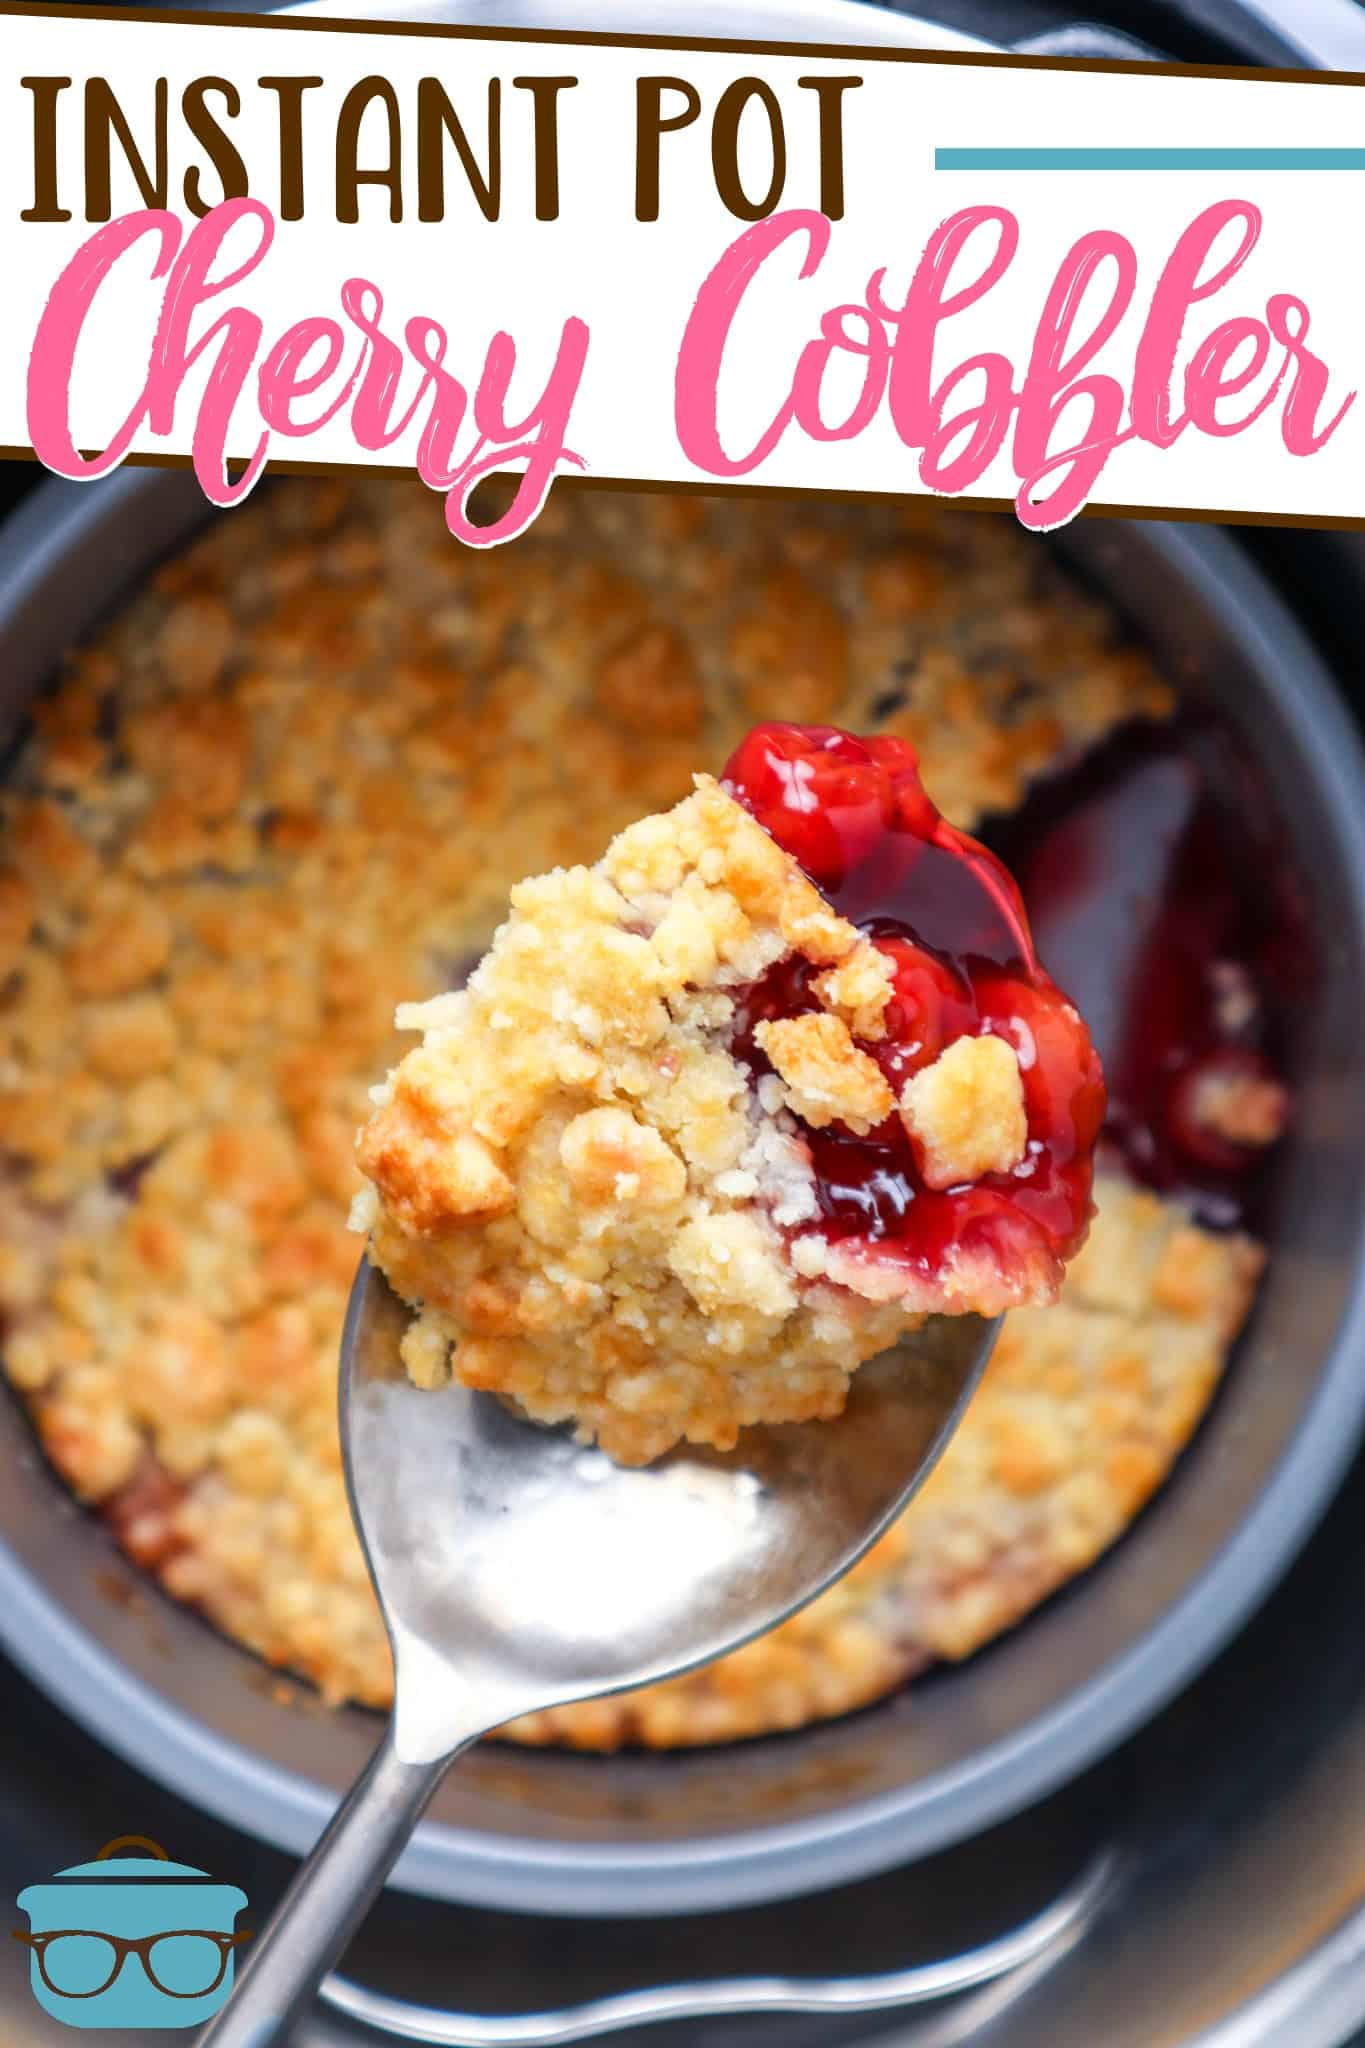 Easy Instant Pot Cherry Cobbler recipe from The Country Cook, pictured, spoon scooping up some cherry cobbler out of the instant pot.